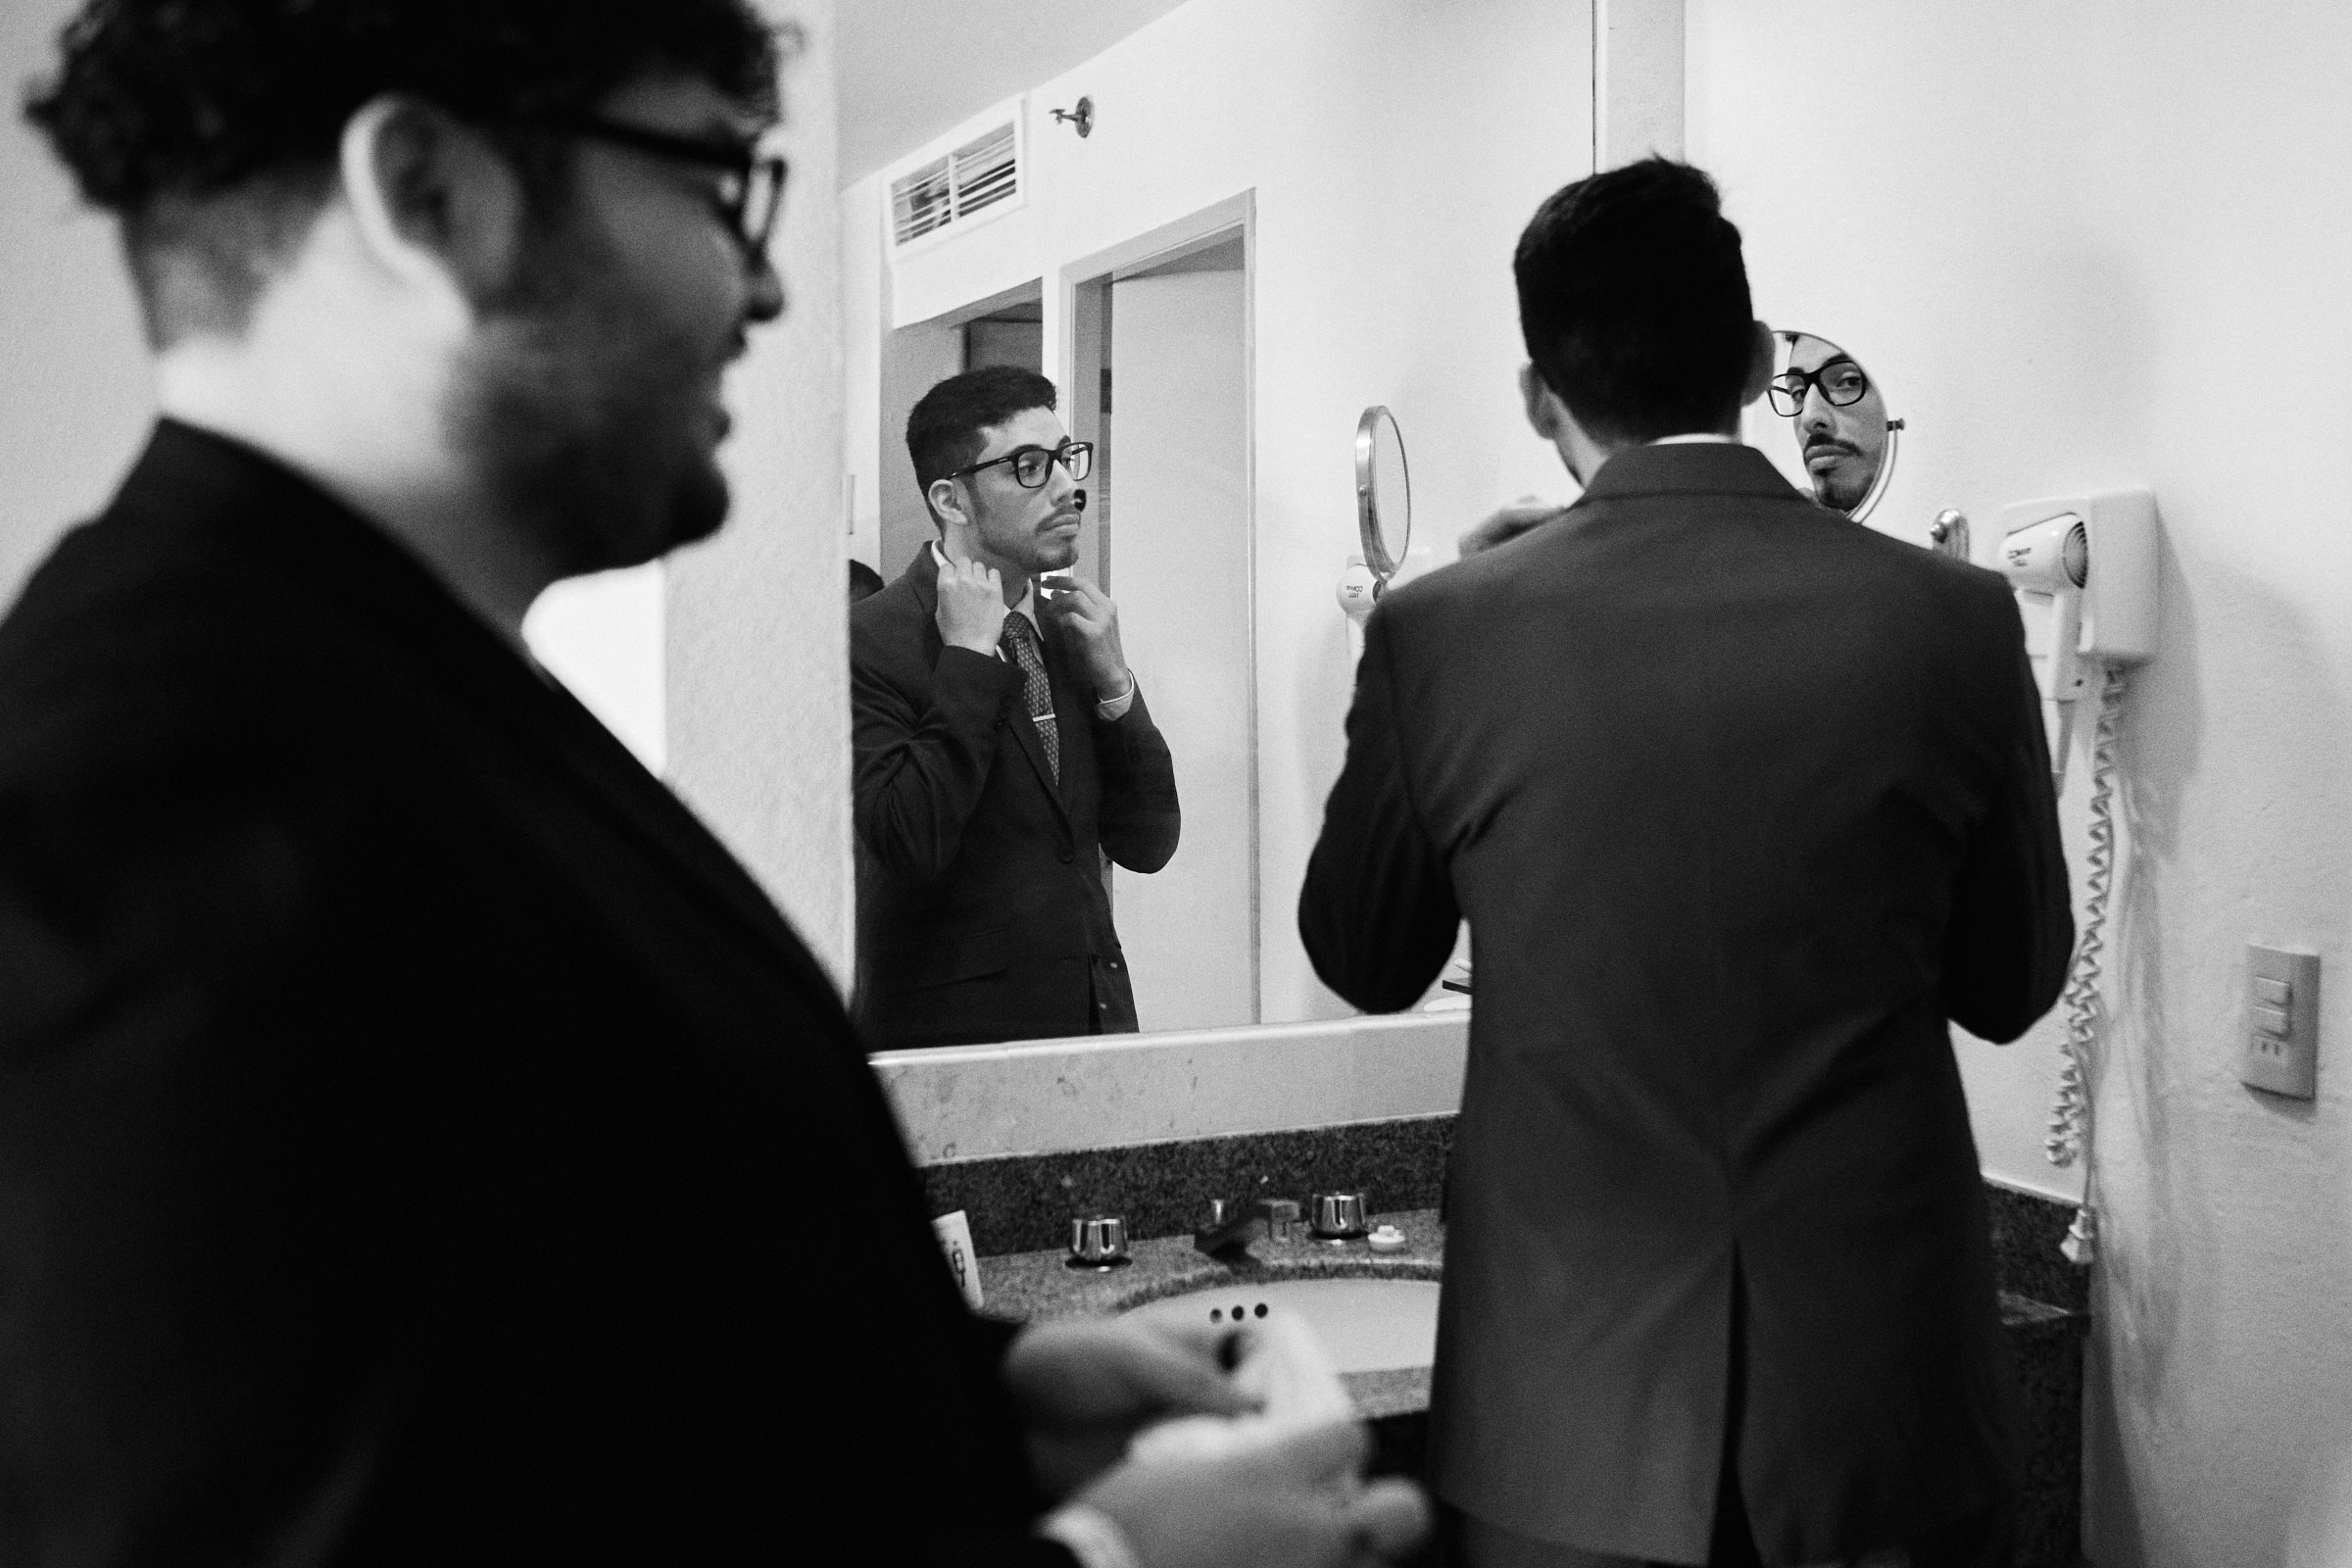 Groom Fixes His Tie In The Mirror The Morning Of The Wedding